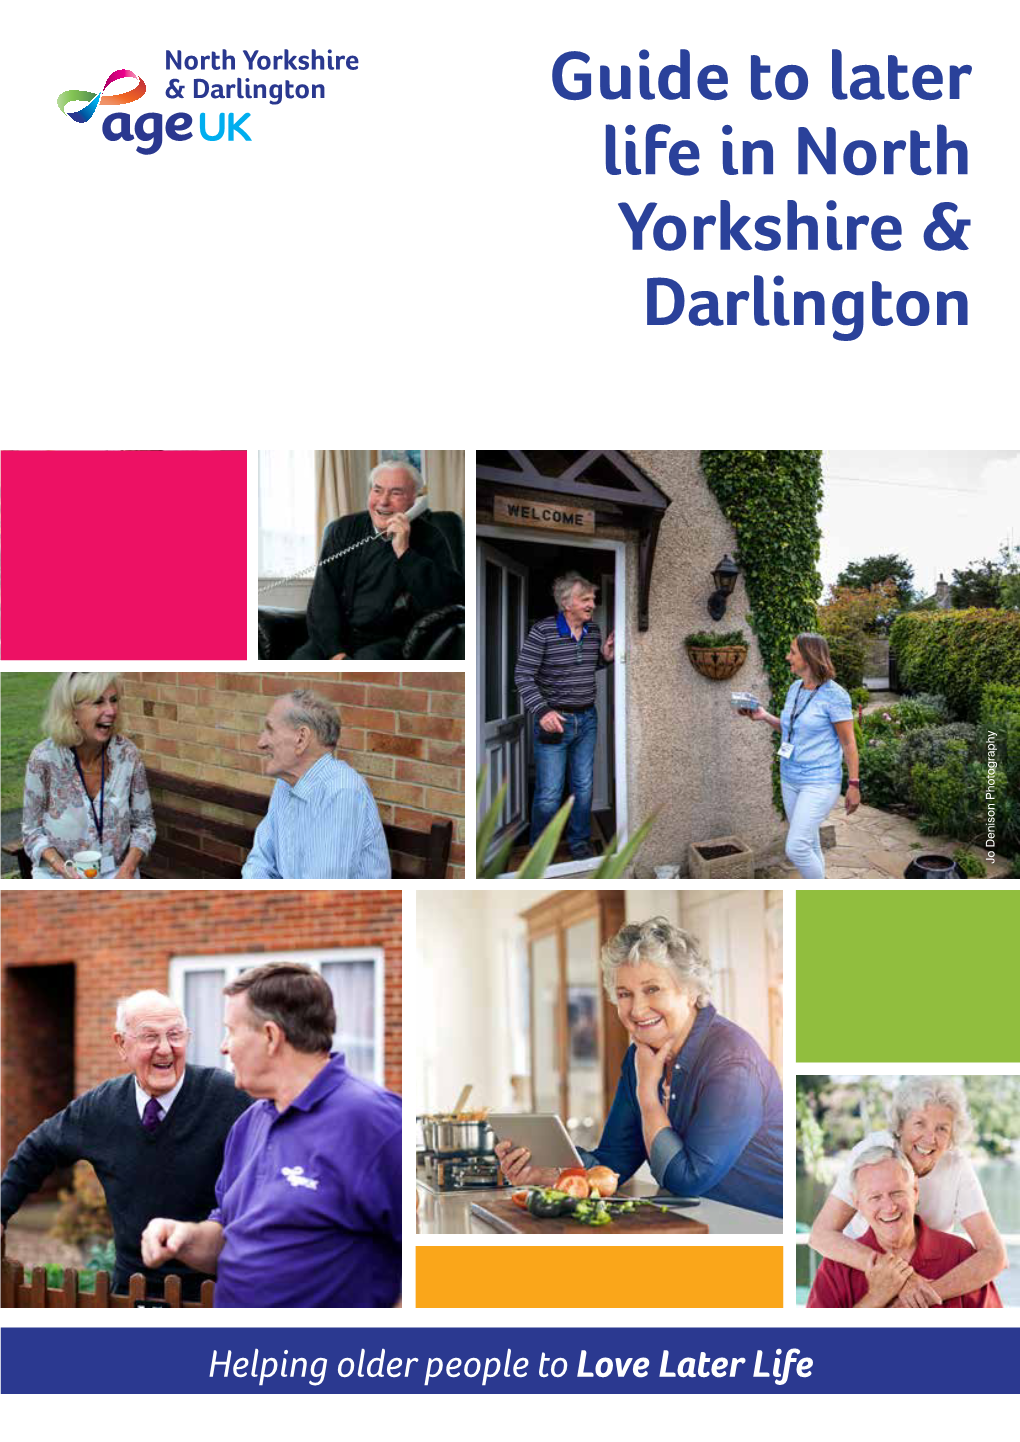 Guide to Later Life in North Yorkshire & Darlington